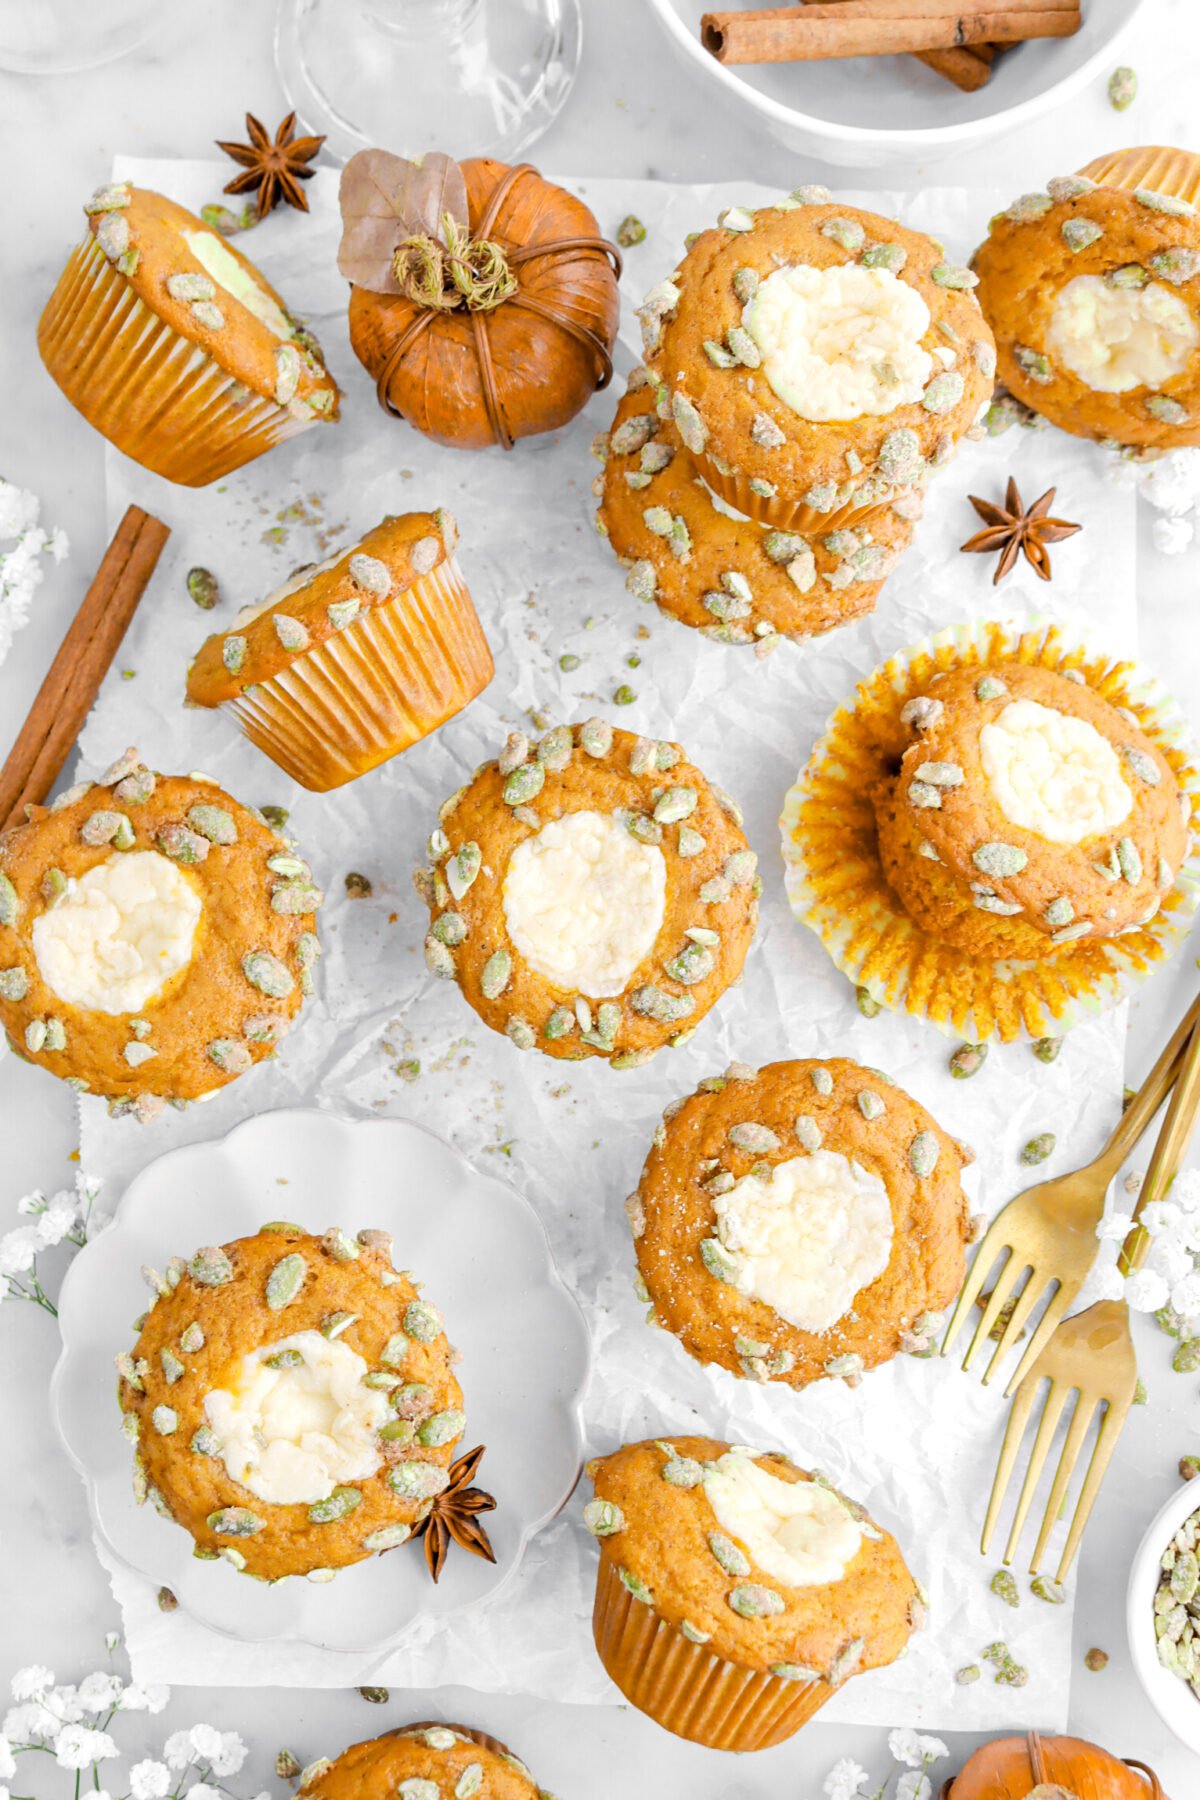 overhead image of pumpkin muffins on parchment paper with one muffin on small scalloped plate with cinnamon stick and star anise around, two gold forks, and white flowers around.